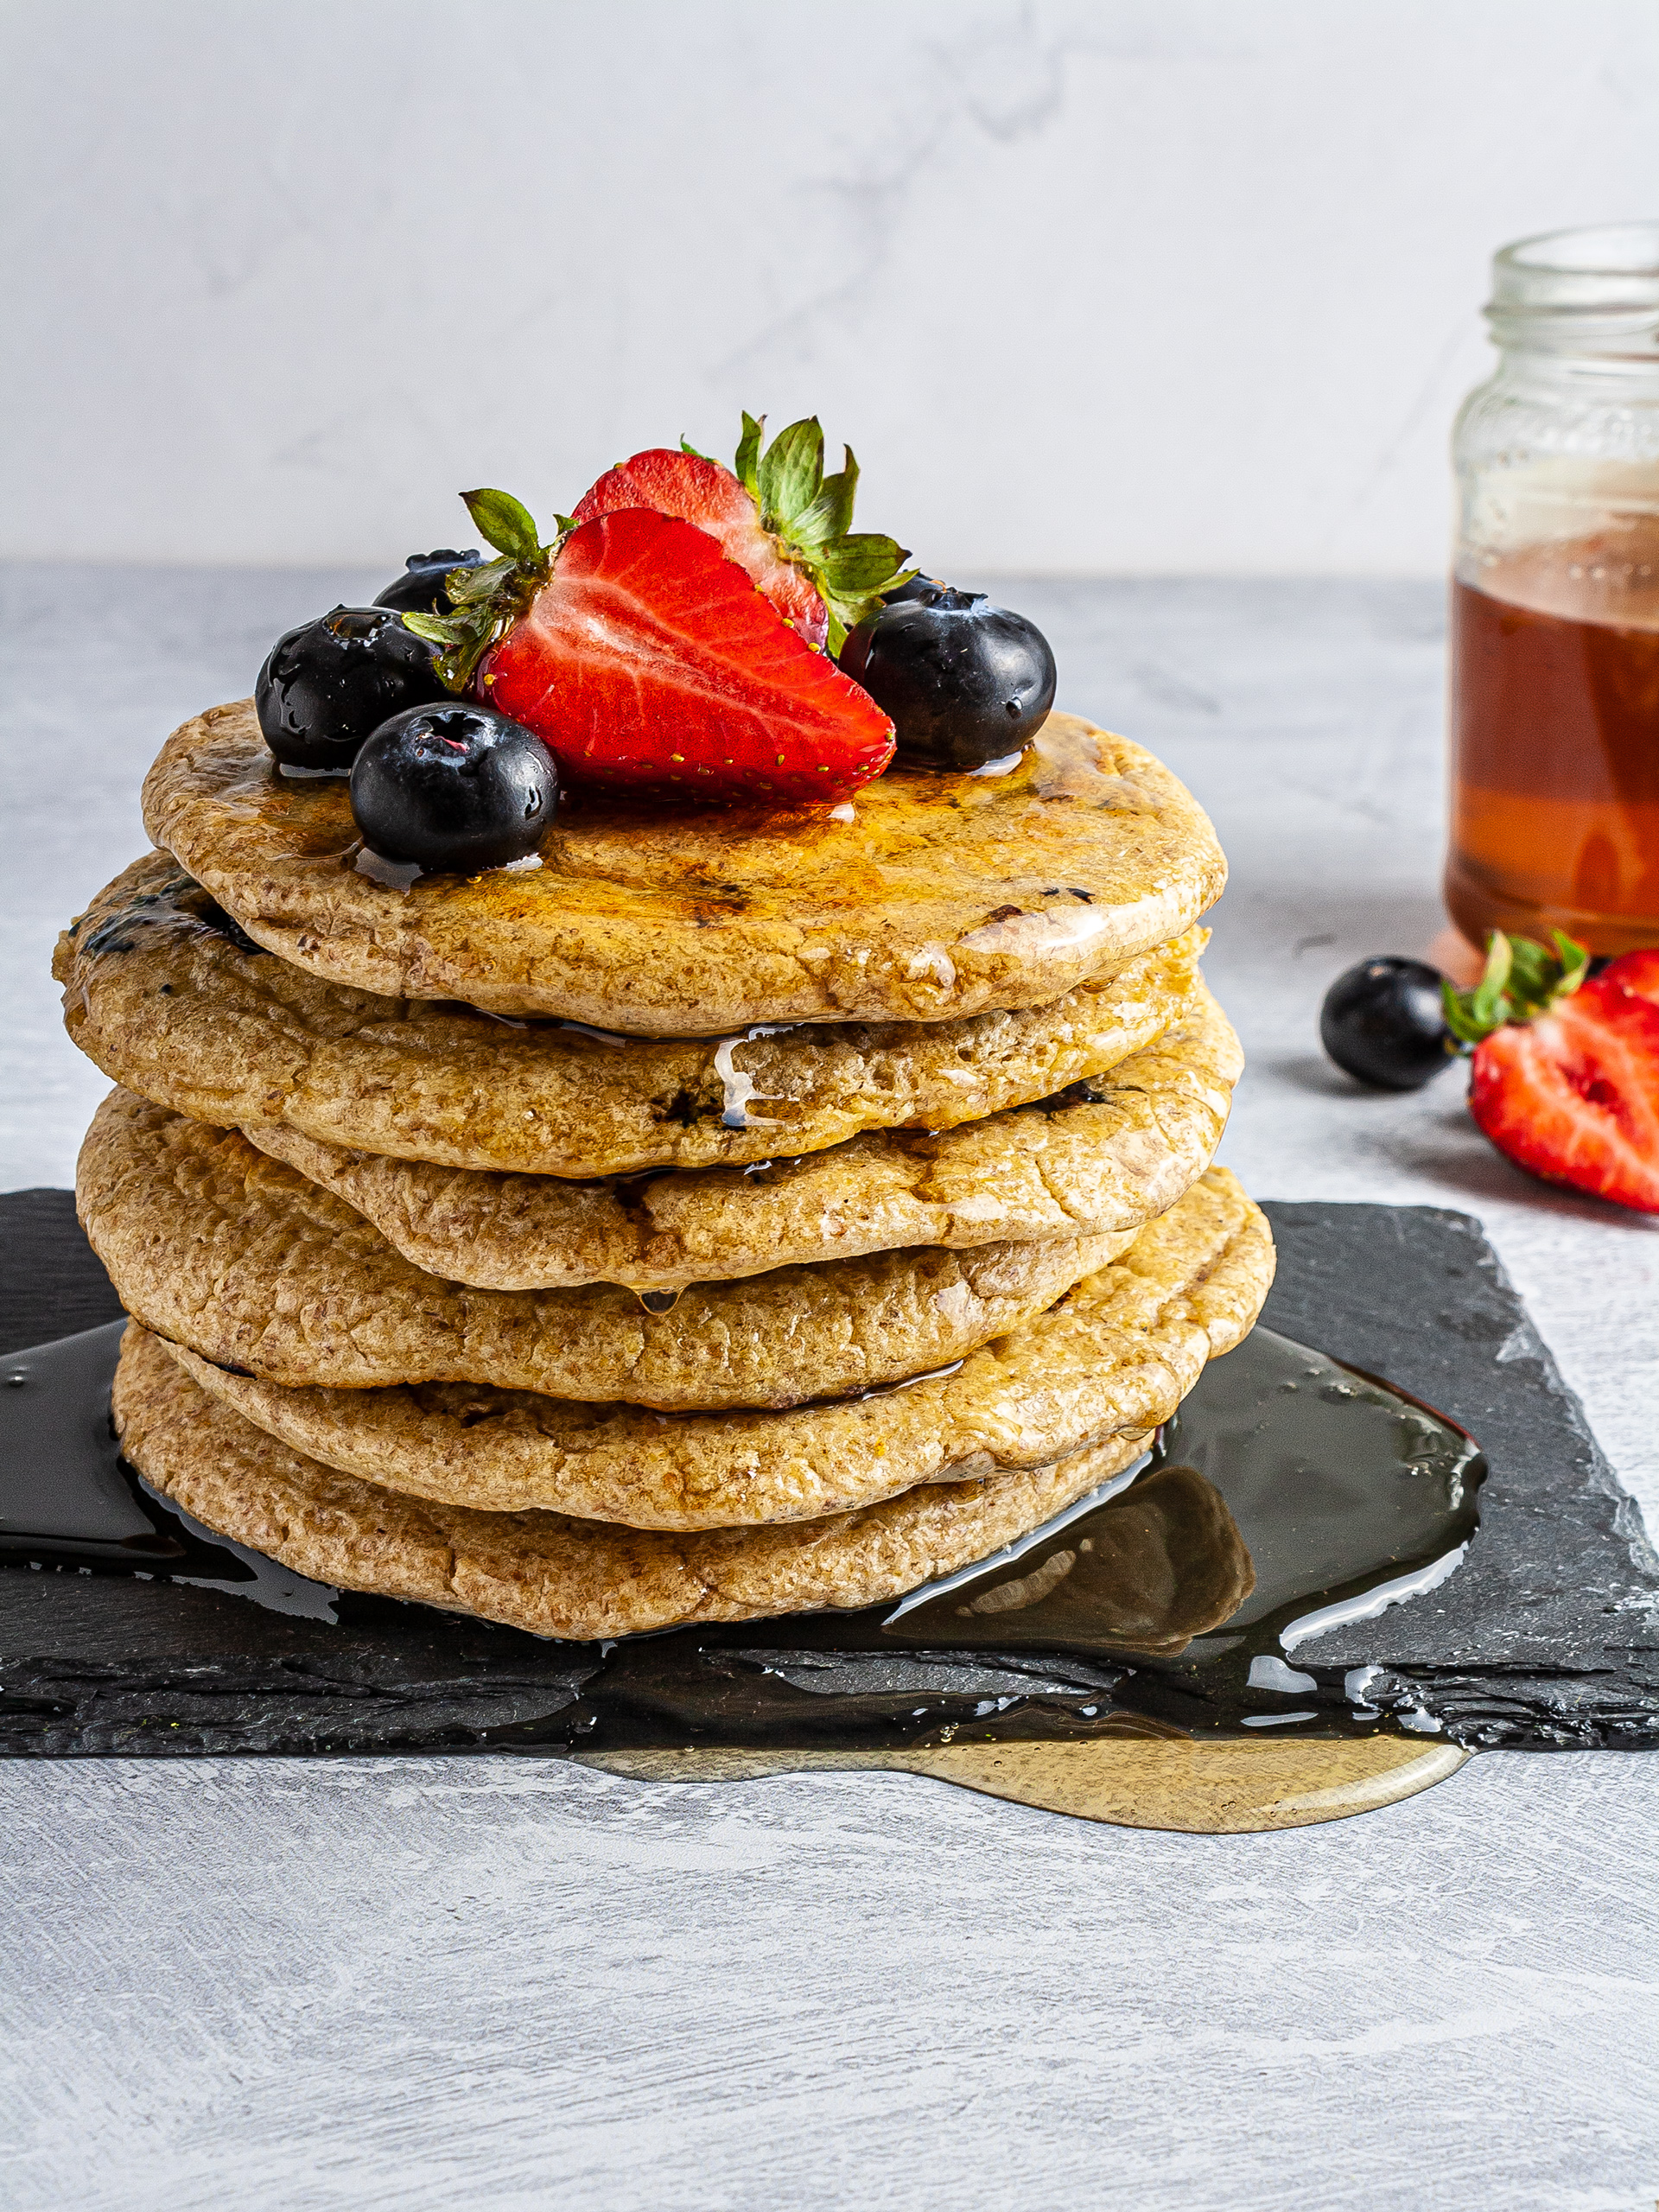 Stacked oatmeal pancakes with blueberries and strawberries